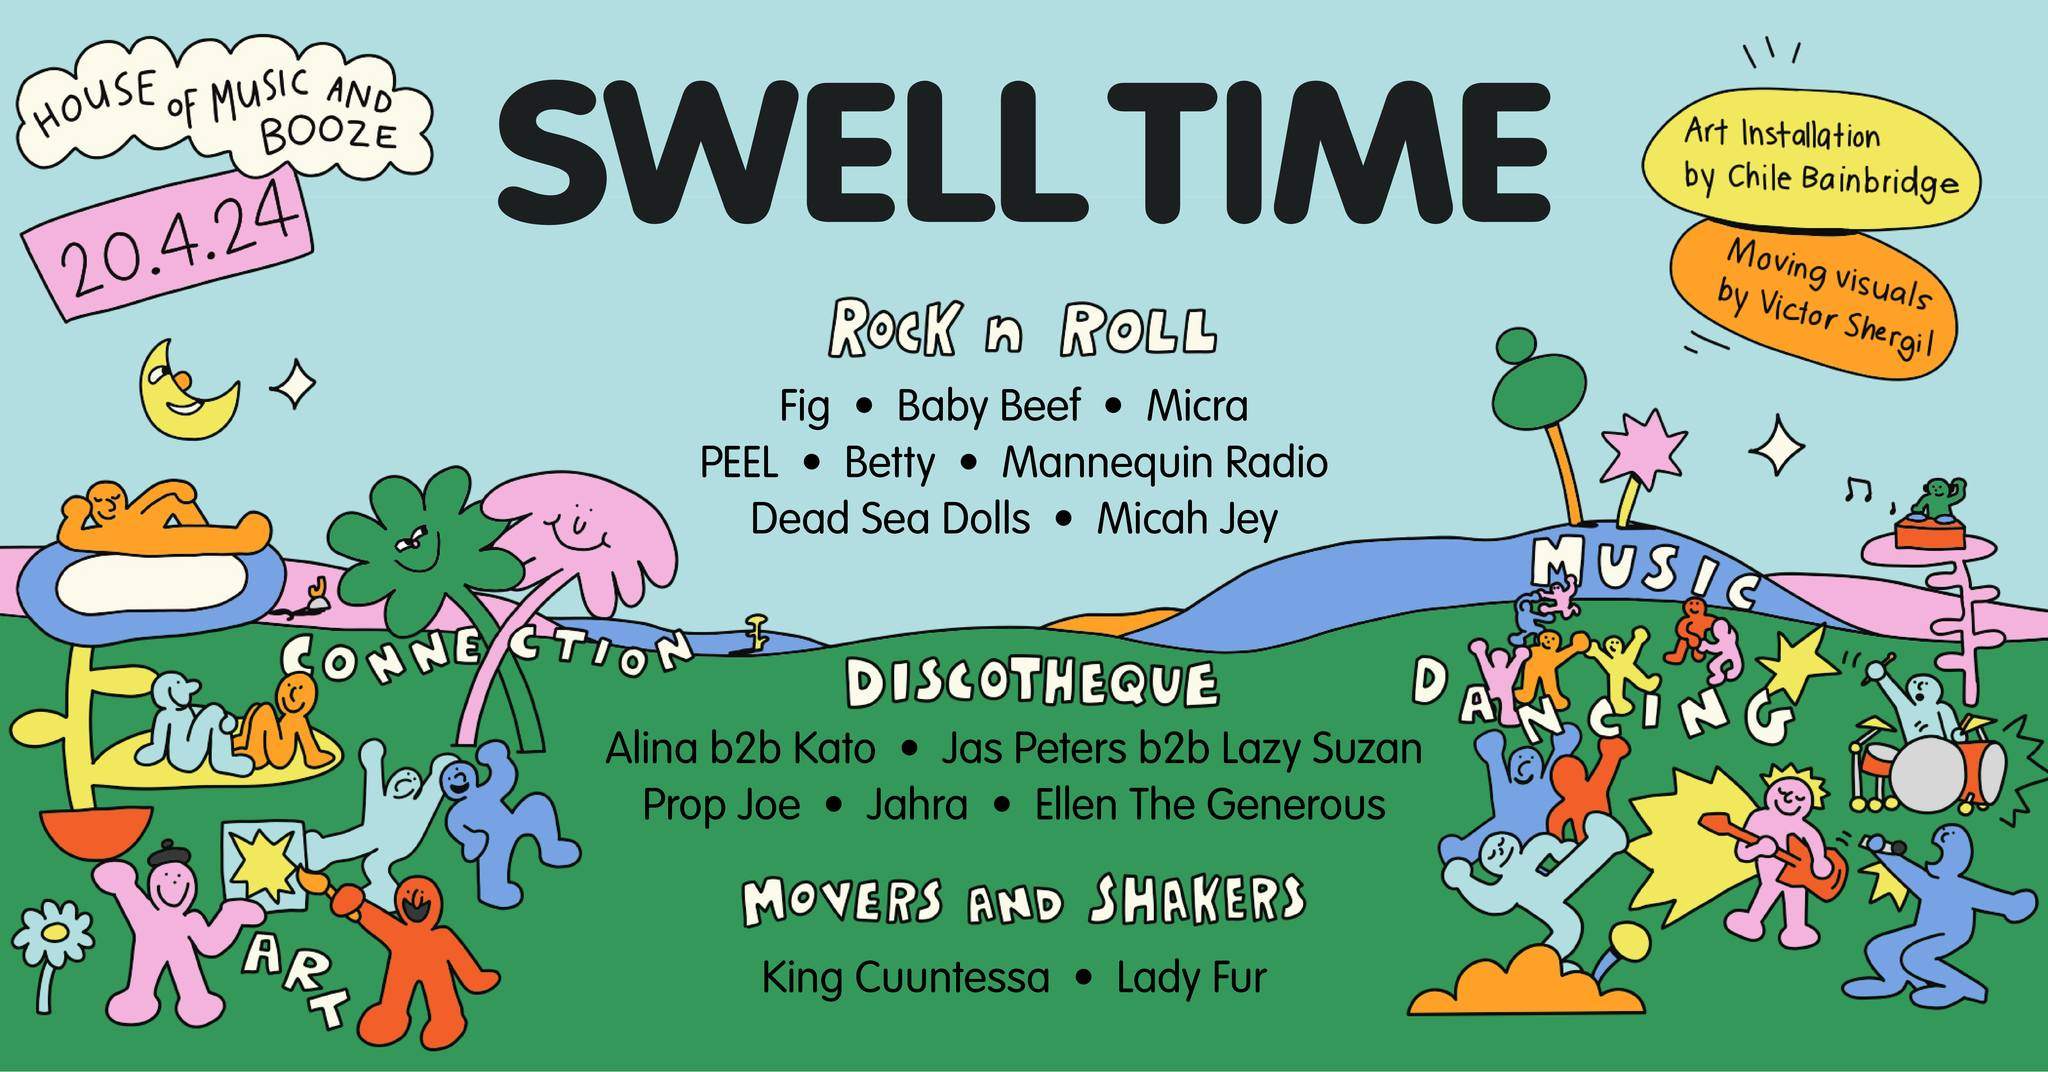 Swell Time - Página frontal